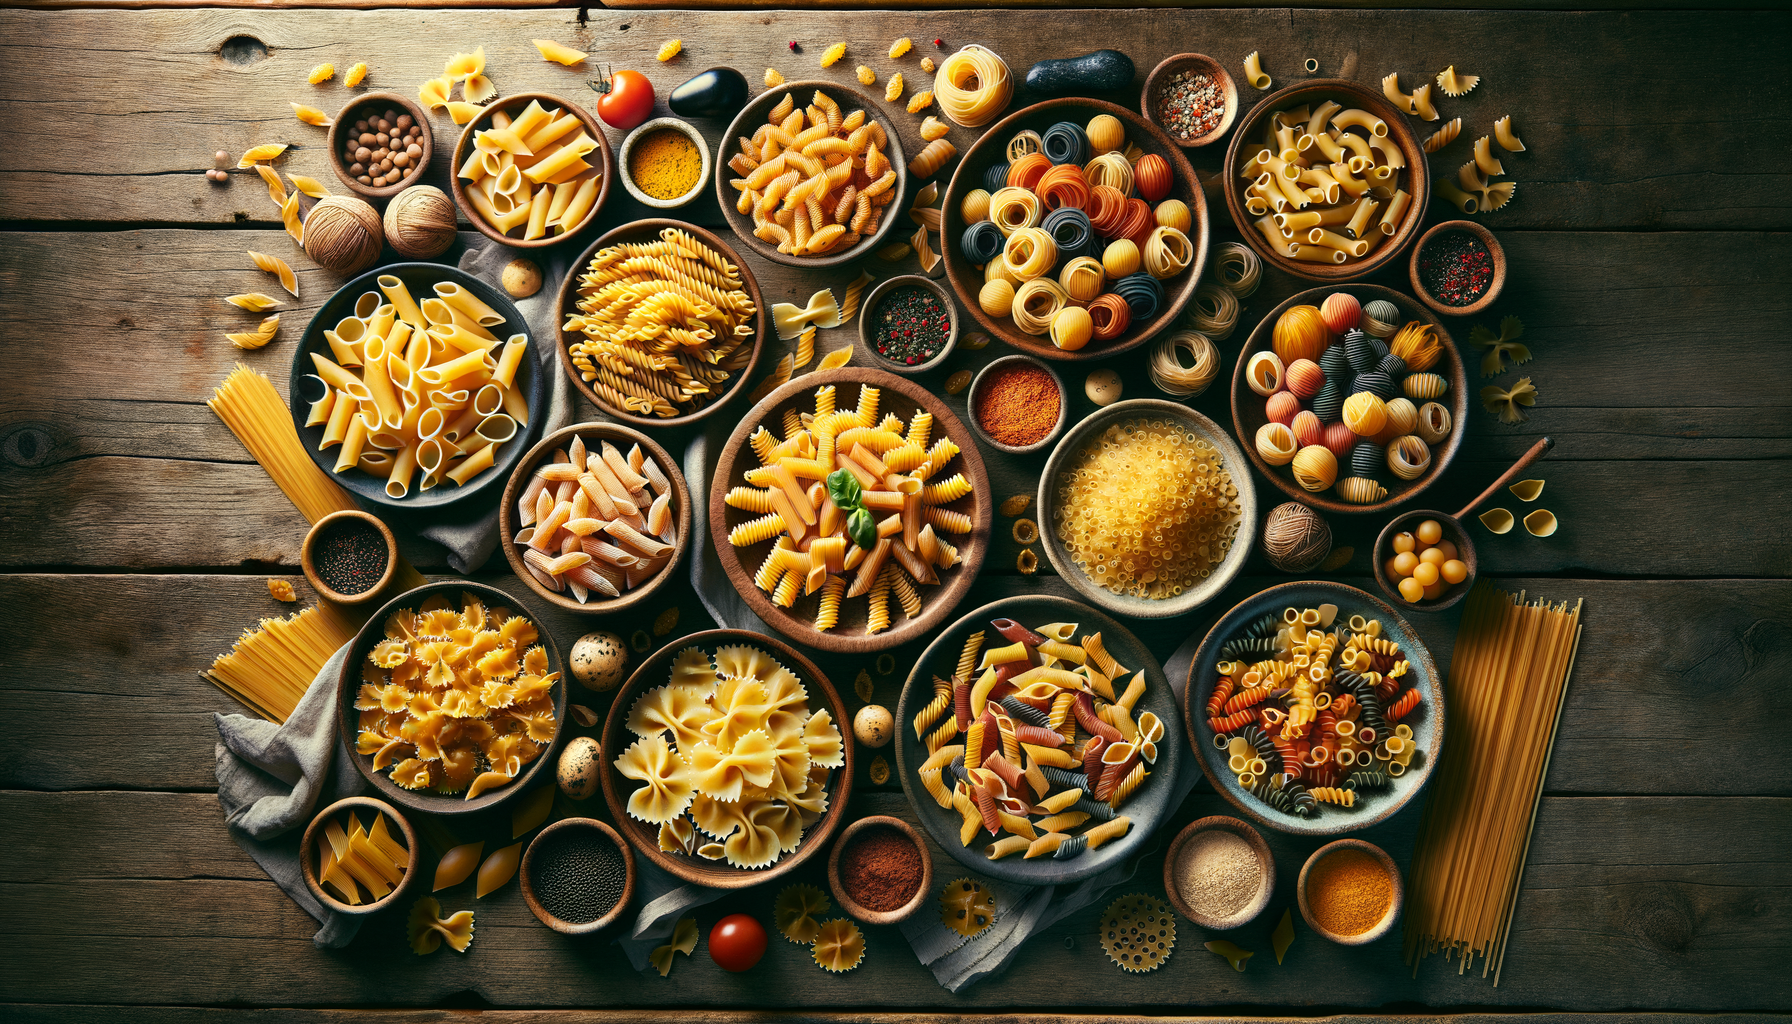 Assorted pasta dishes on a wooden table, highlighting different pasta shapes and colors without any text or logos.